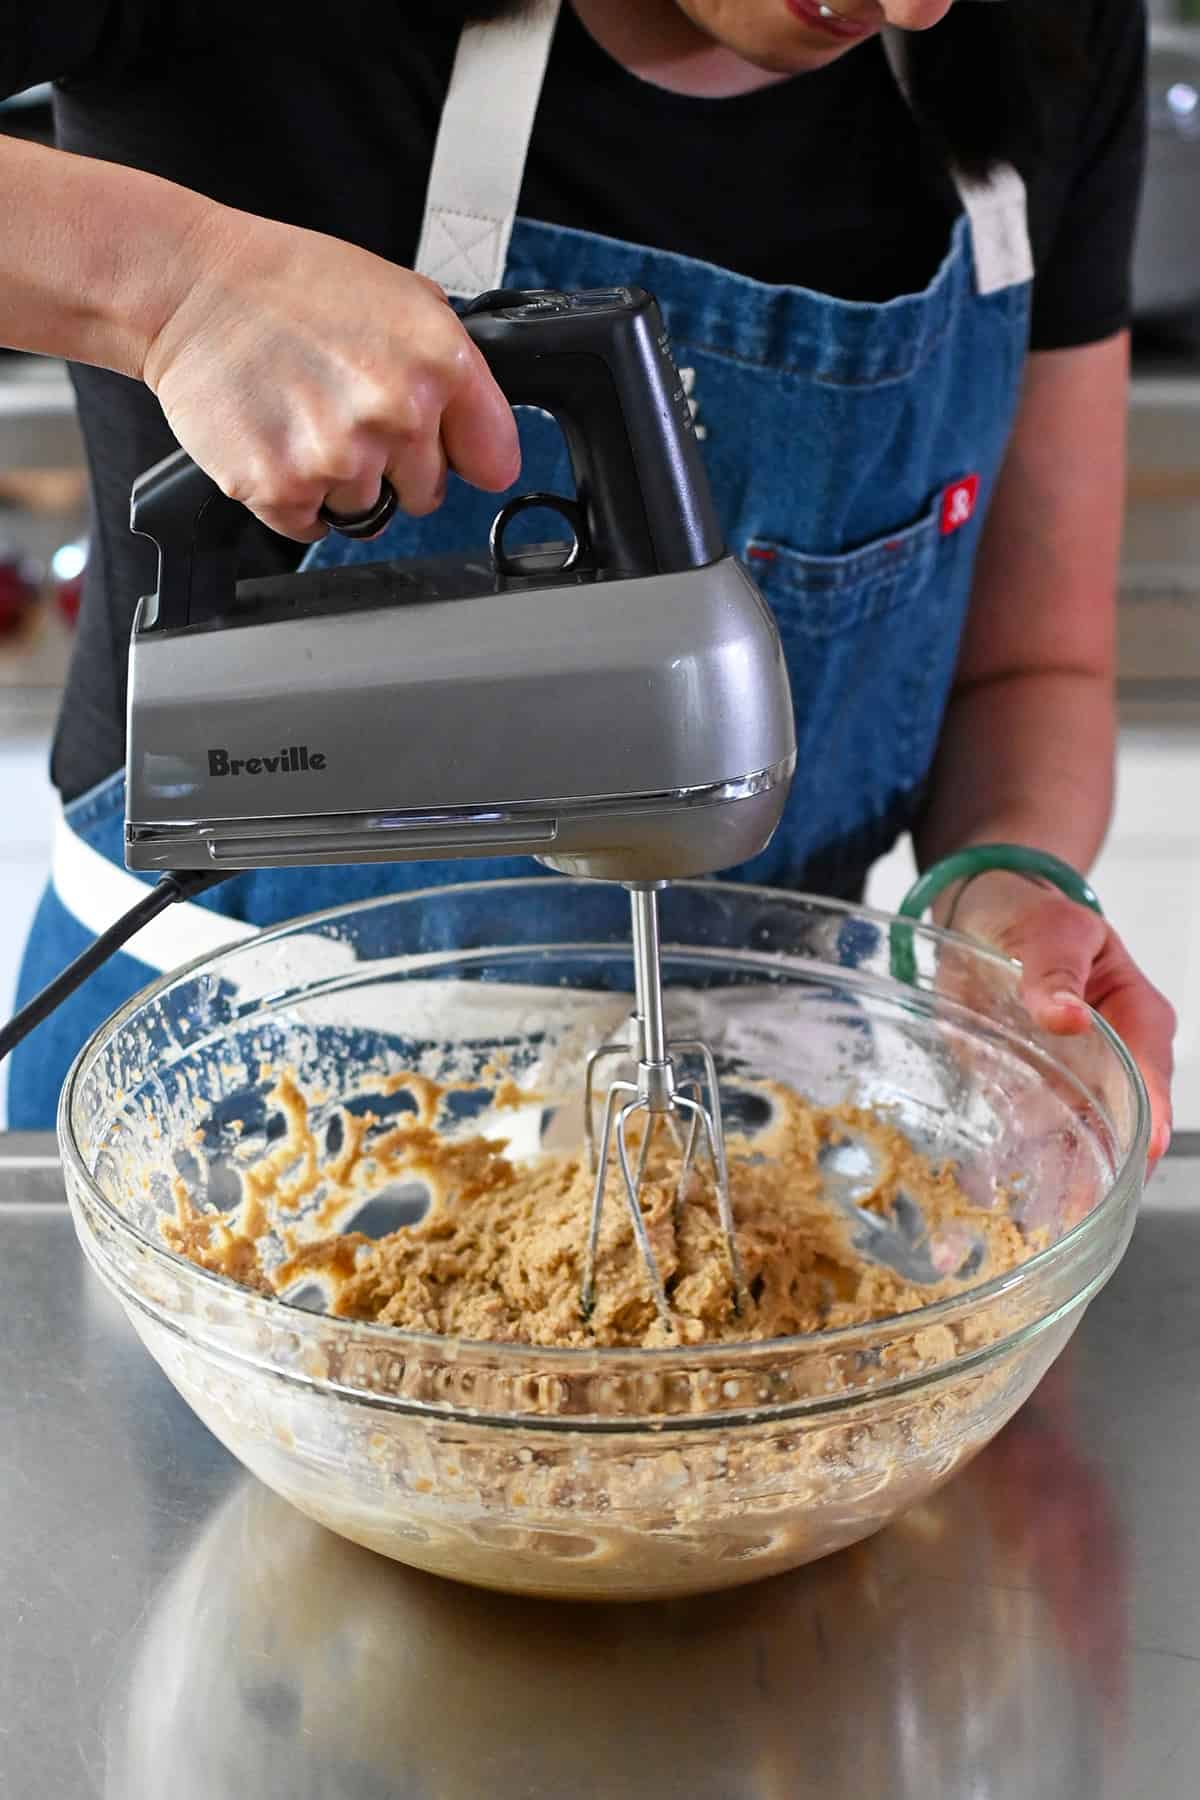 A person in a blue apron is using a hand mixer to combine the batter for paleo banana cookies in a glass mixing bowl.